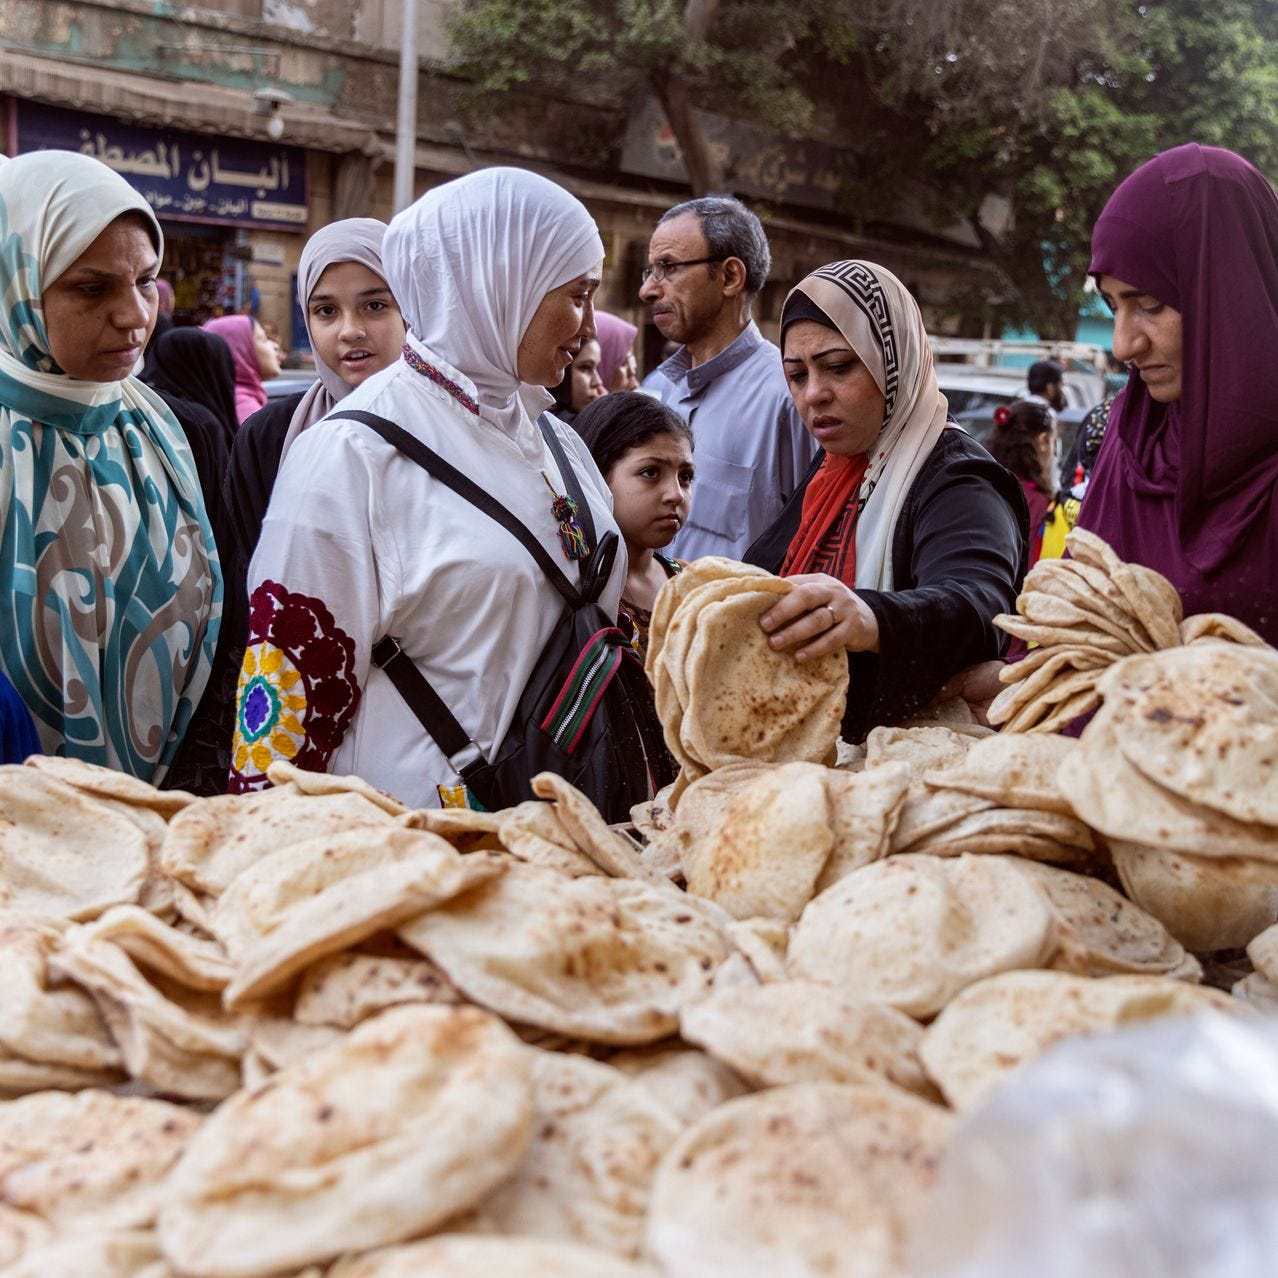 Women buy bread from a local stand in Cairo, Egypt, May 2022.